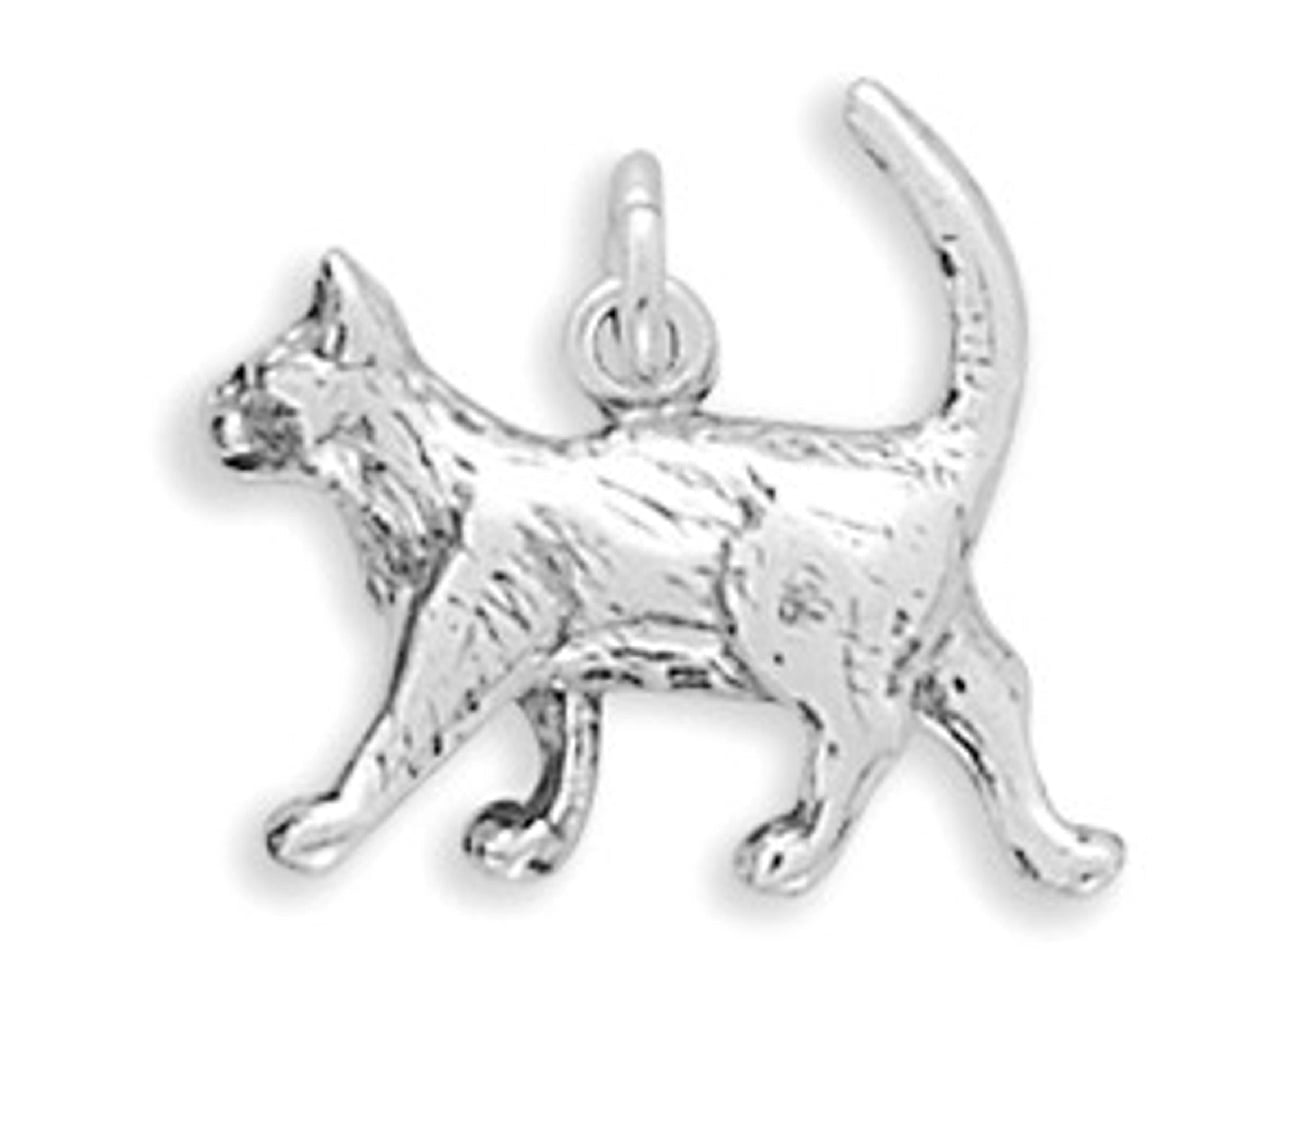 Kitty Cat with Christmas Ornament 3D 925 Solid Sterling Silver Charm Kitten 